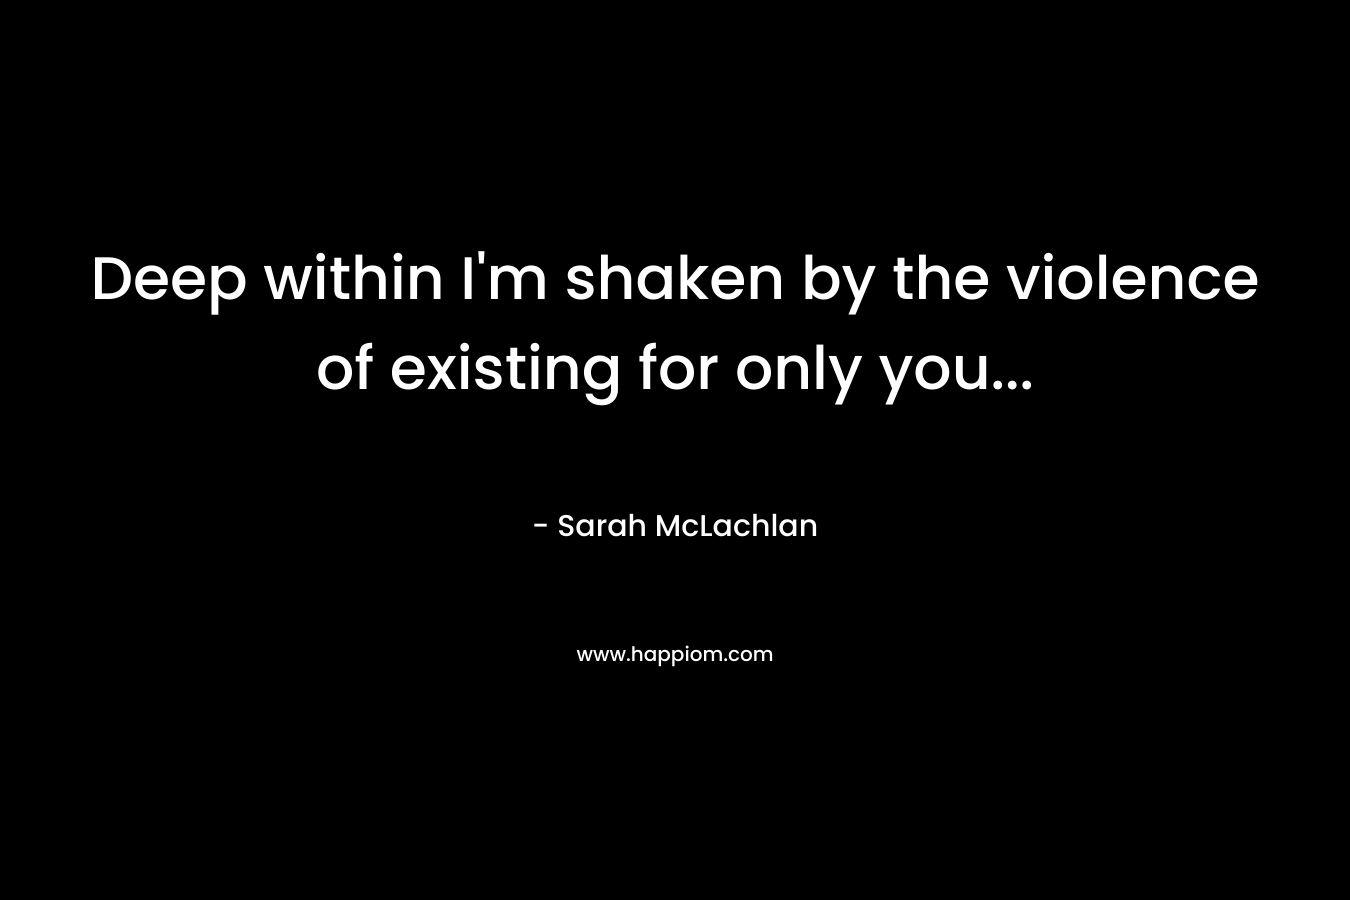 Deep within I'm shaken by the violence of existing for only you...